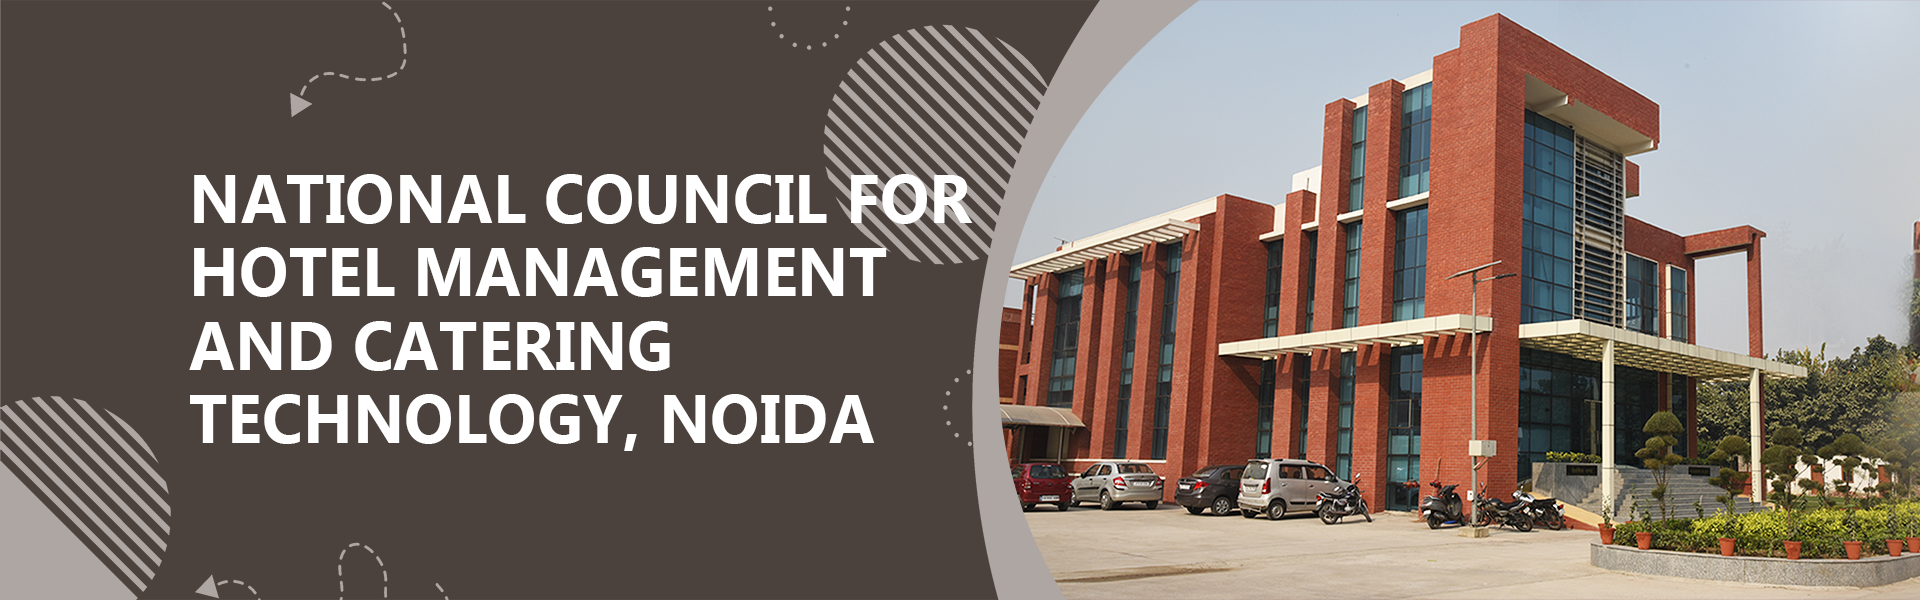 National Council For Hotel Management And Catering Technology, Noida